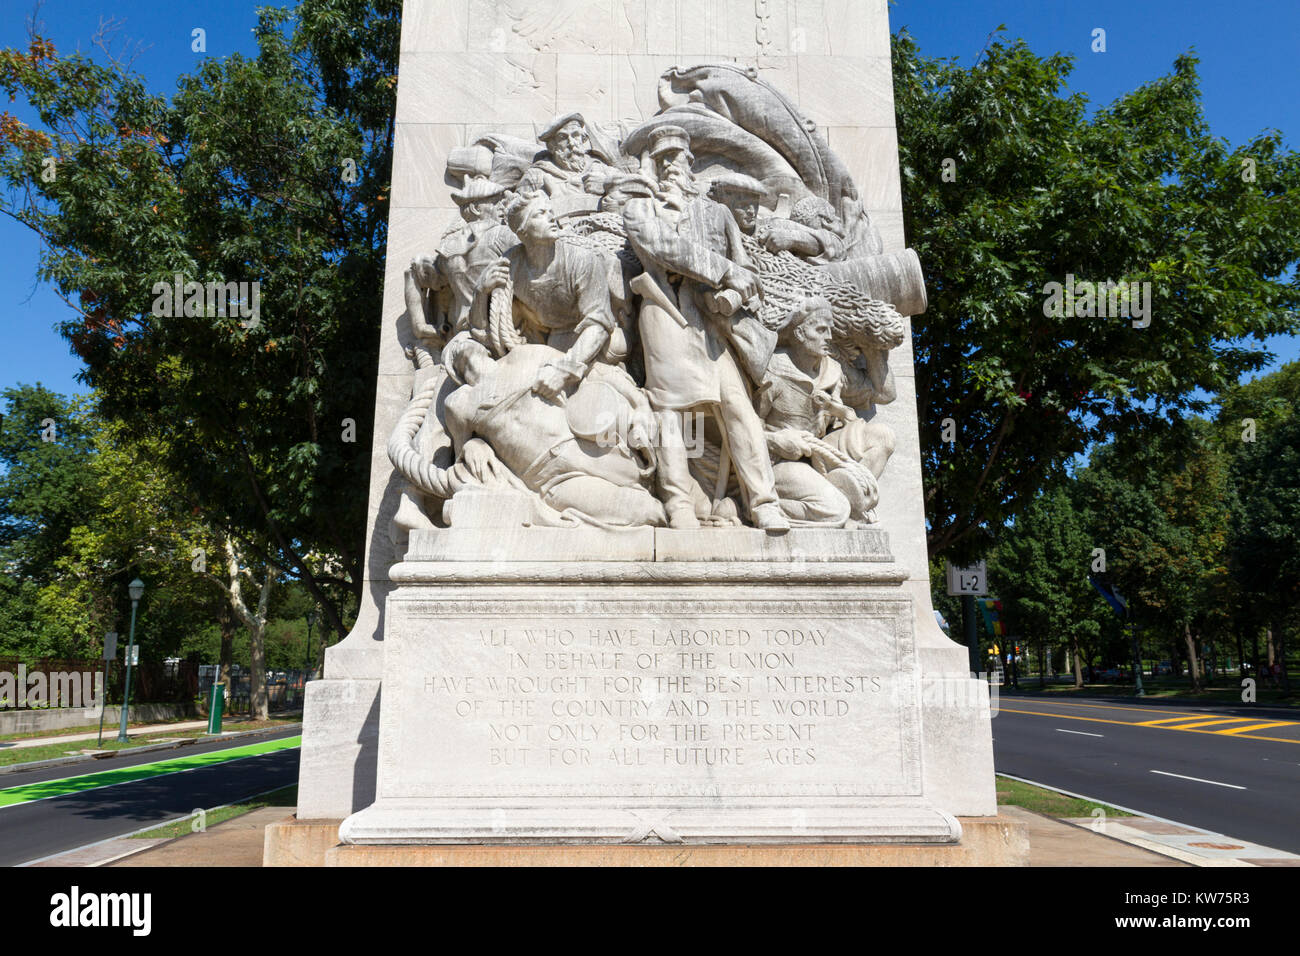 The Civil War Soldiers and Sailors Memorial (Sailors featured here) on Benjamin Franklin Parkway in Philadelphia, Pennsylvania, United States. Stock Photo